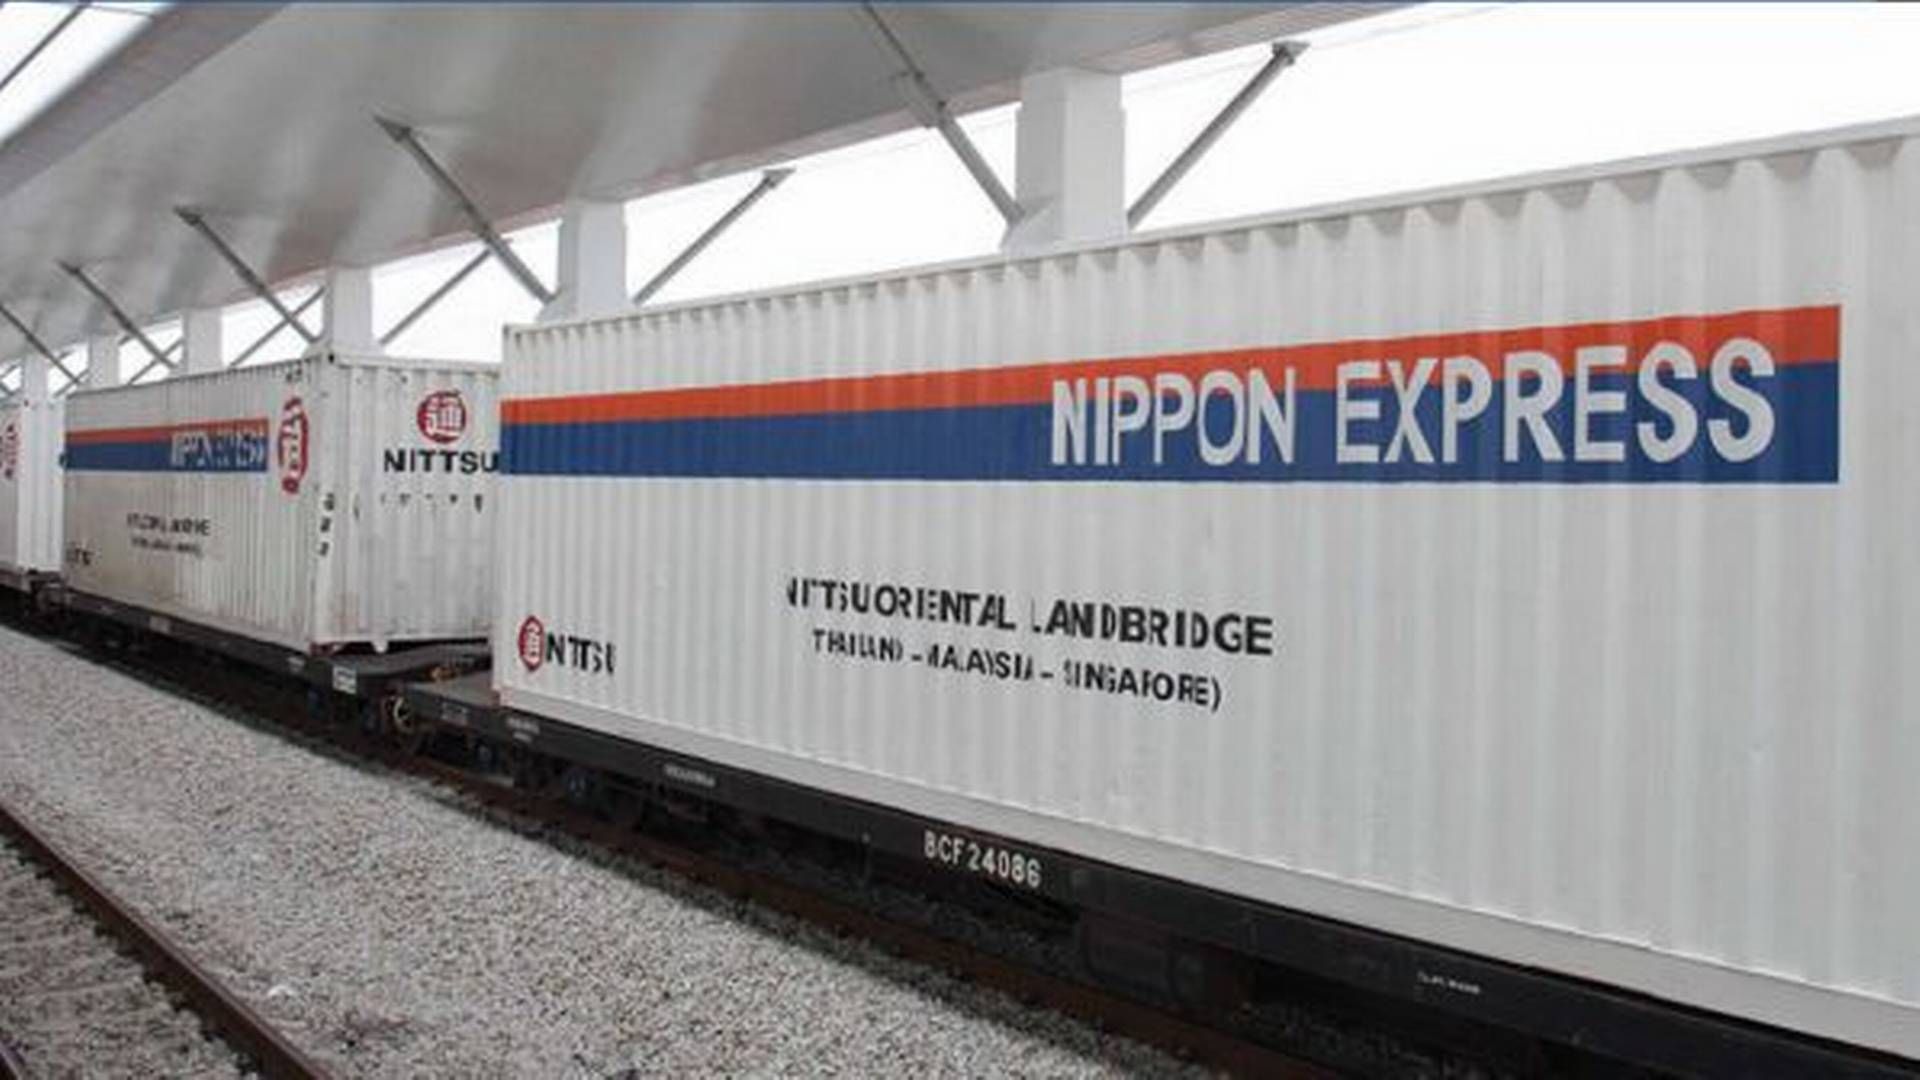 Nippon Express is affected by a challenging freight market that has sent operating earnings plummeting. | Photo: Nippon Express/pr